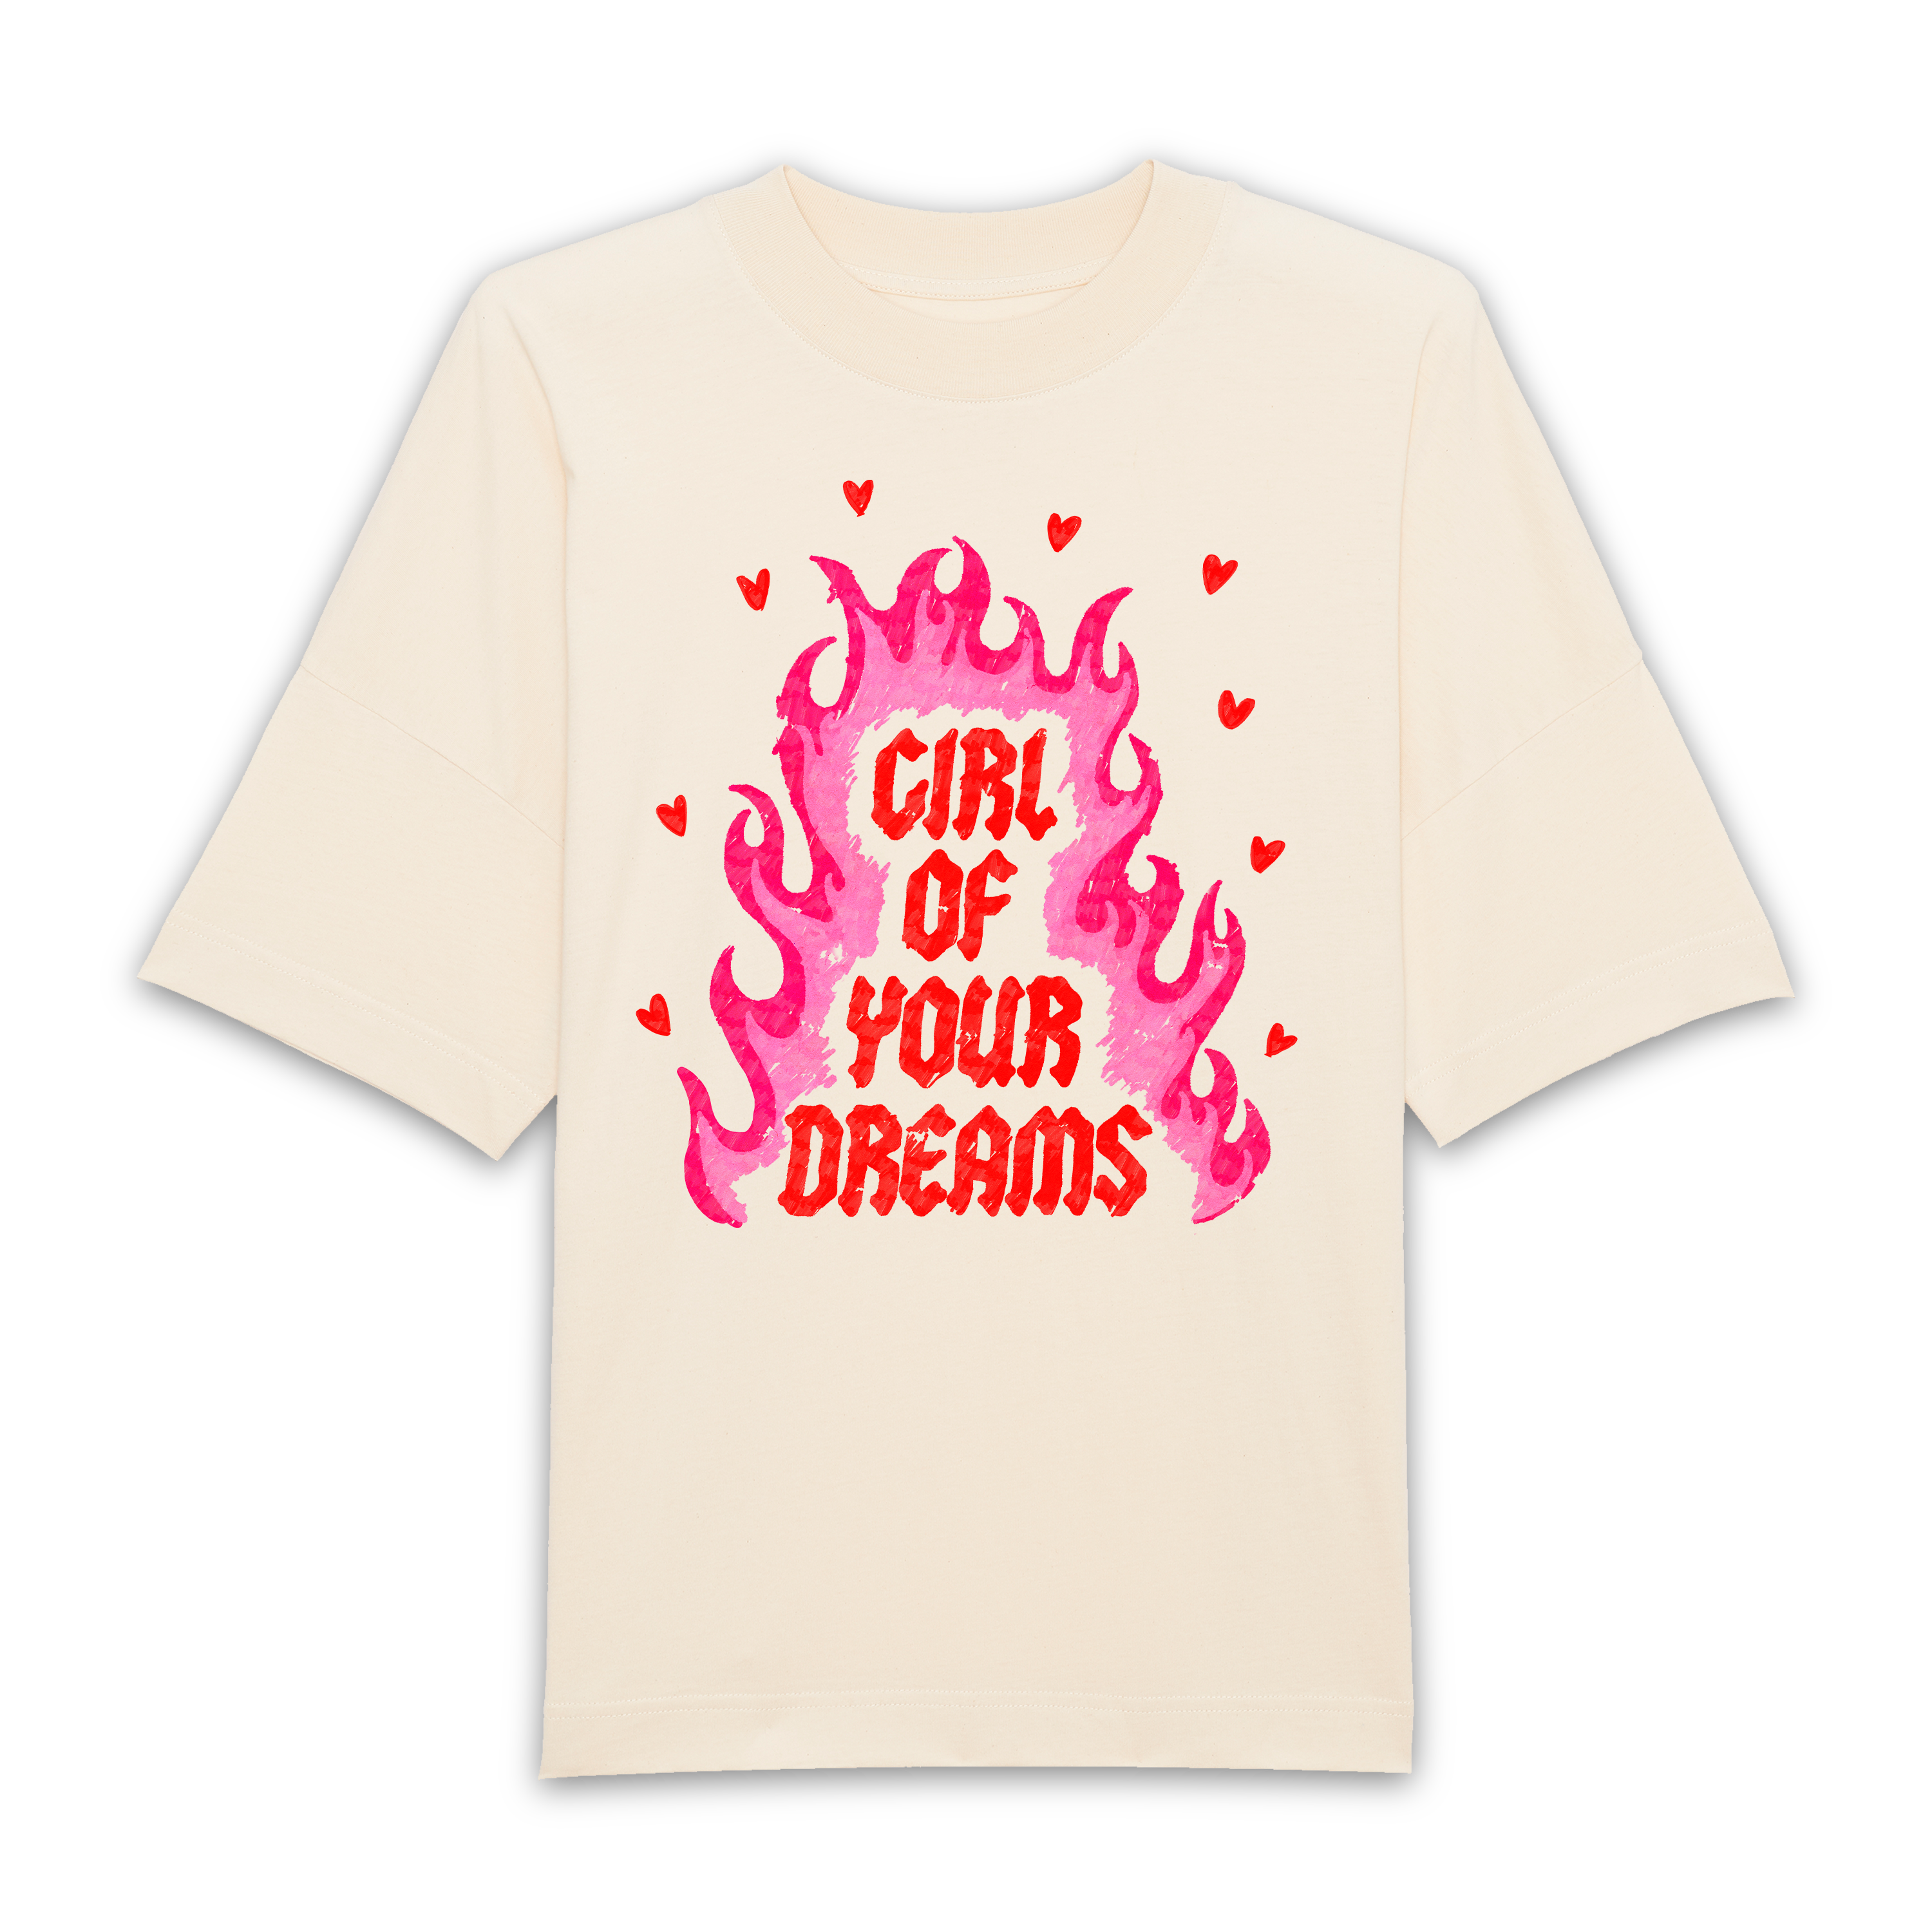 Dylan - Girl of Your Dreams Tee